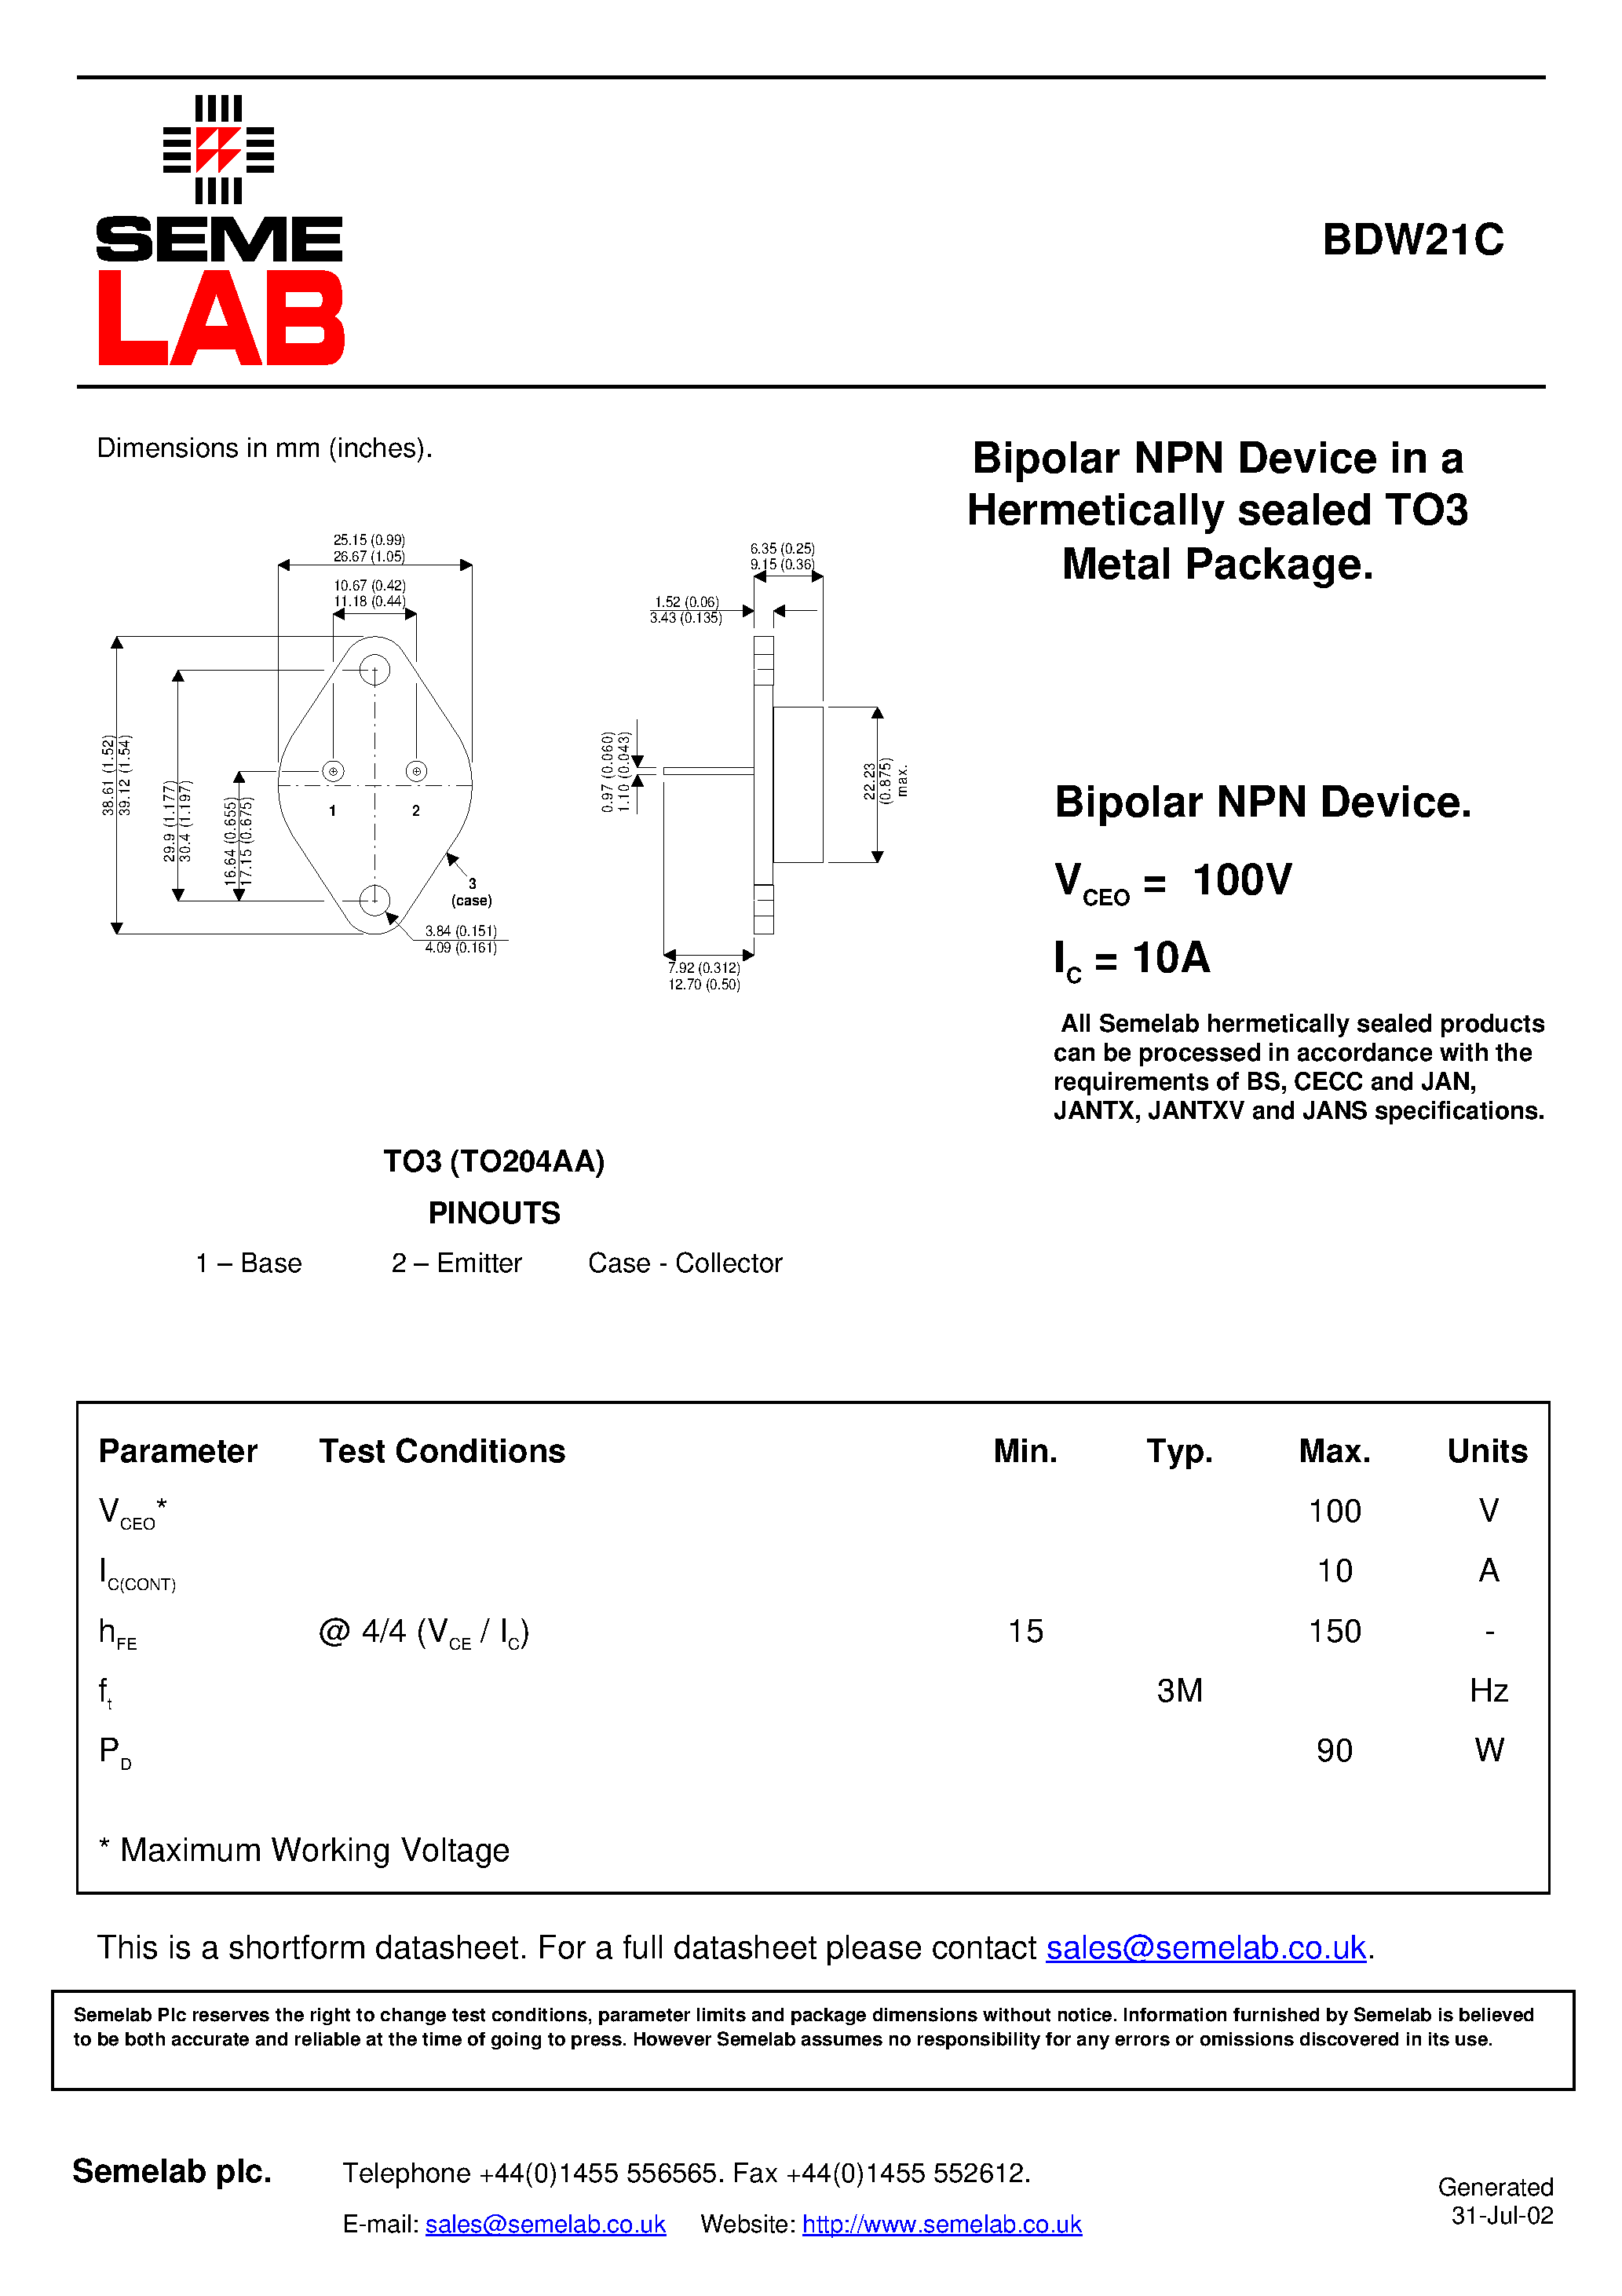 Datasheet BDW21C - Bipolar NPN Device in a Hermetically sealed TO3 Metal Package page 1